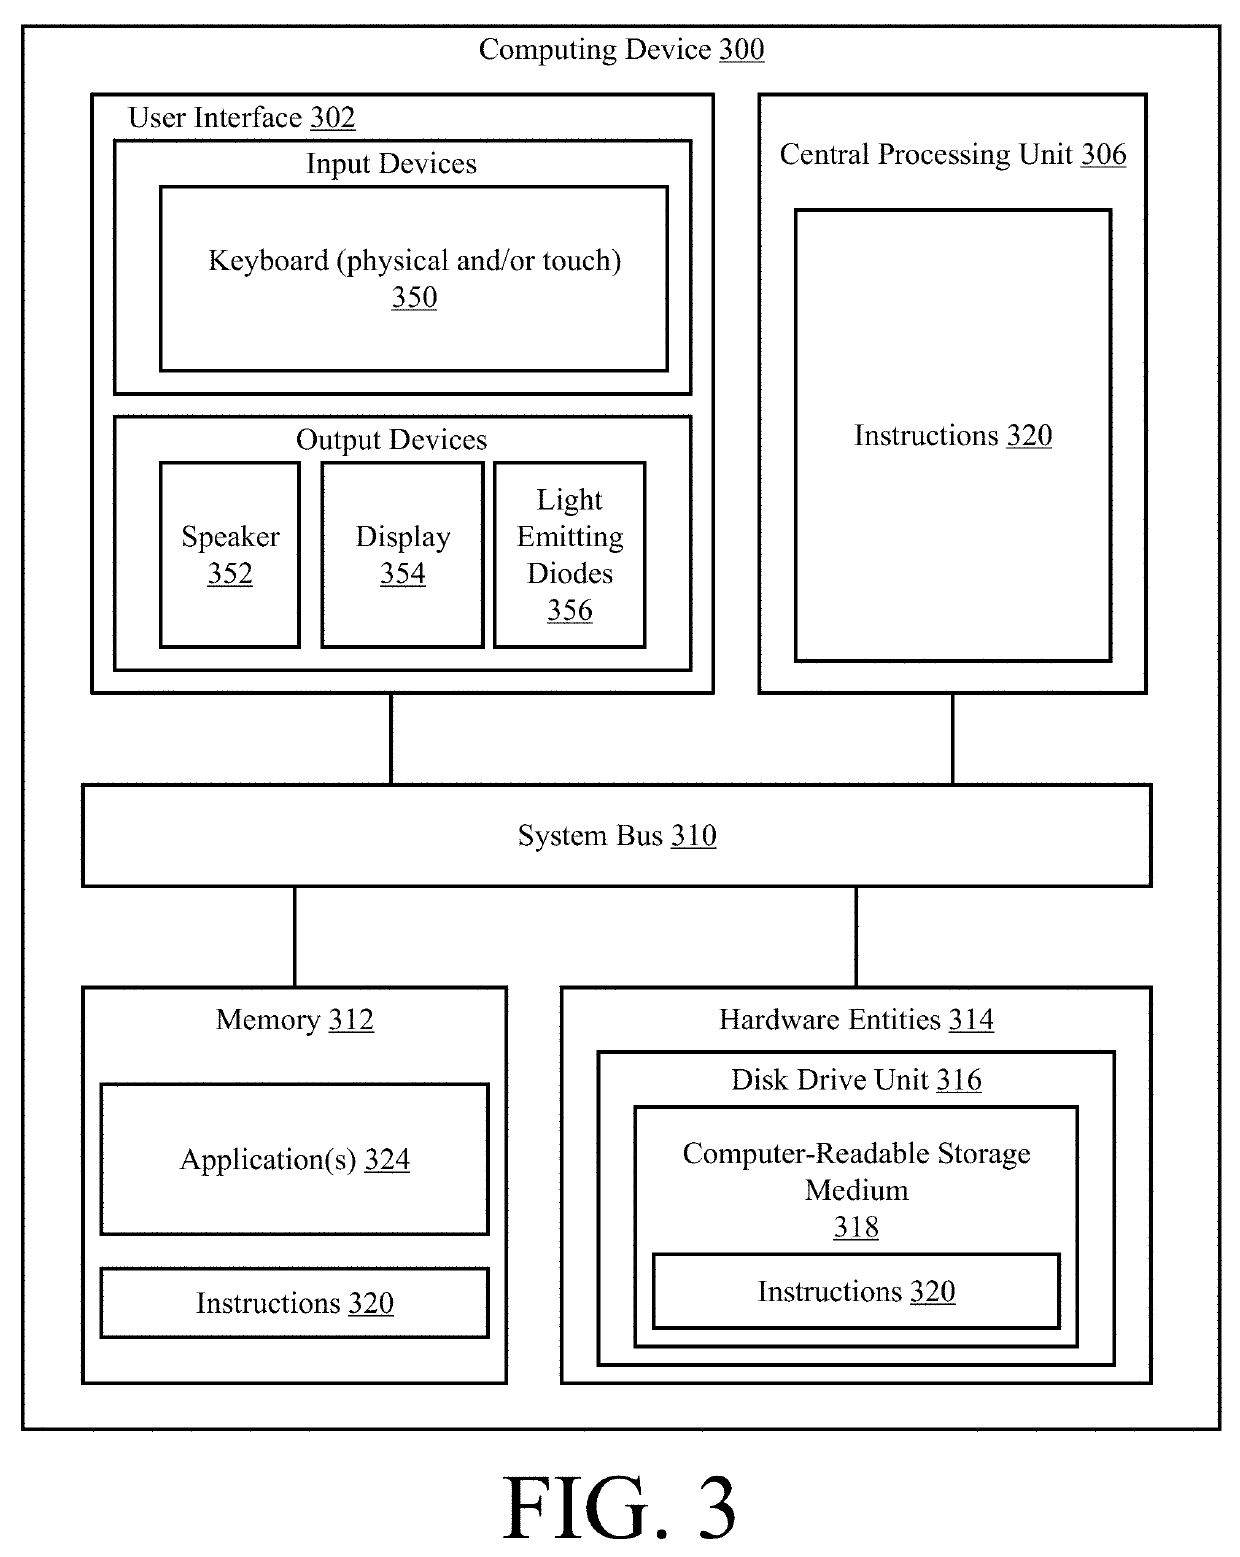 Systems and methods for detecting and thwarting attacks on an it environment